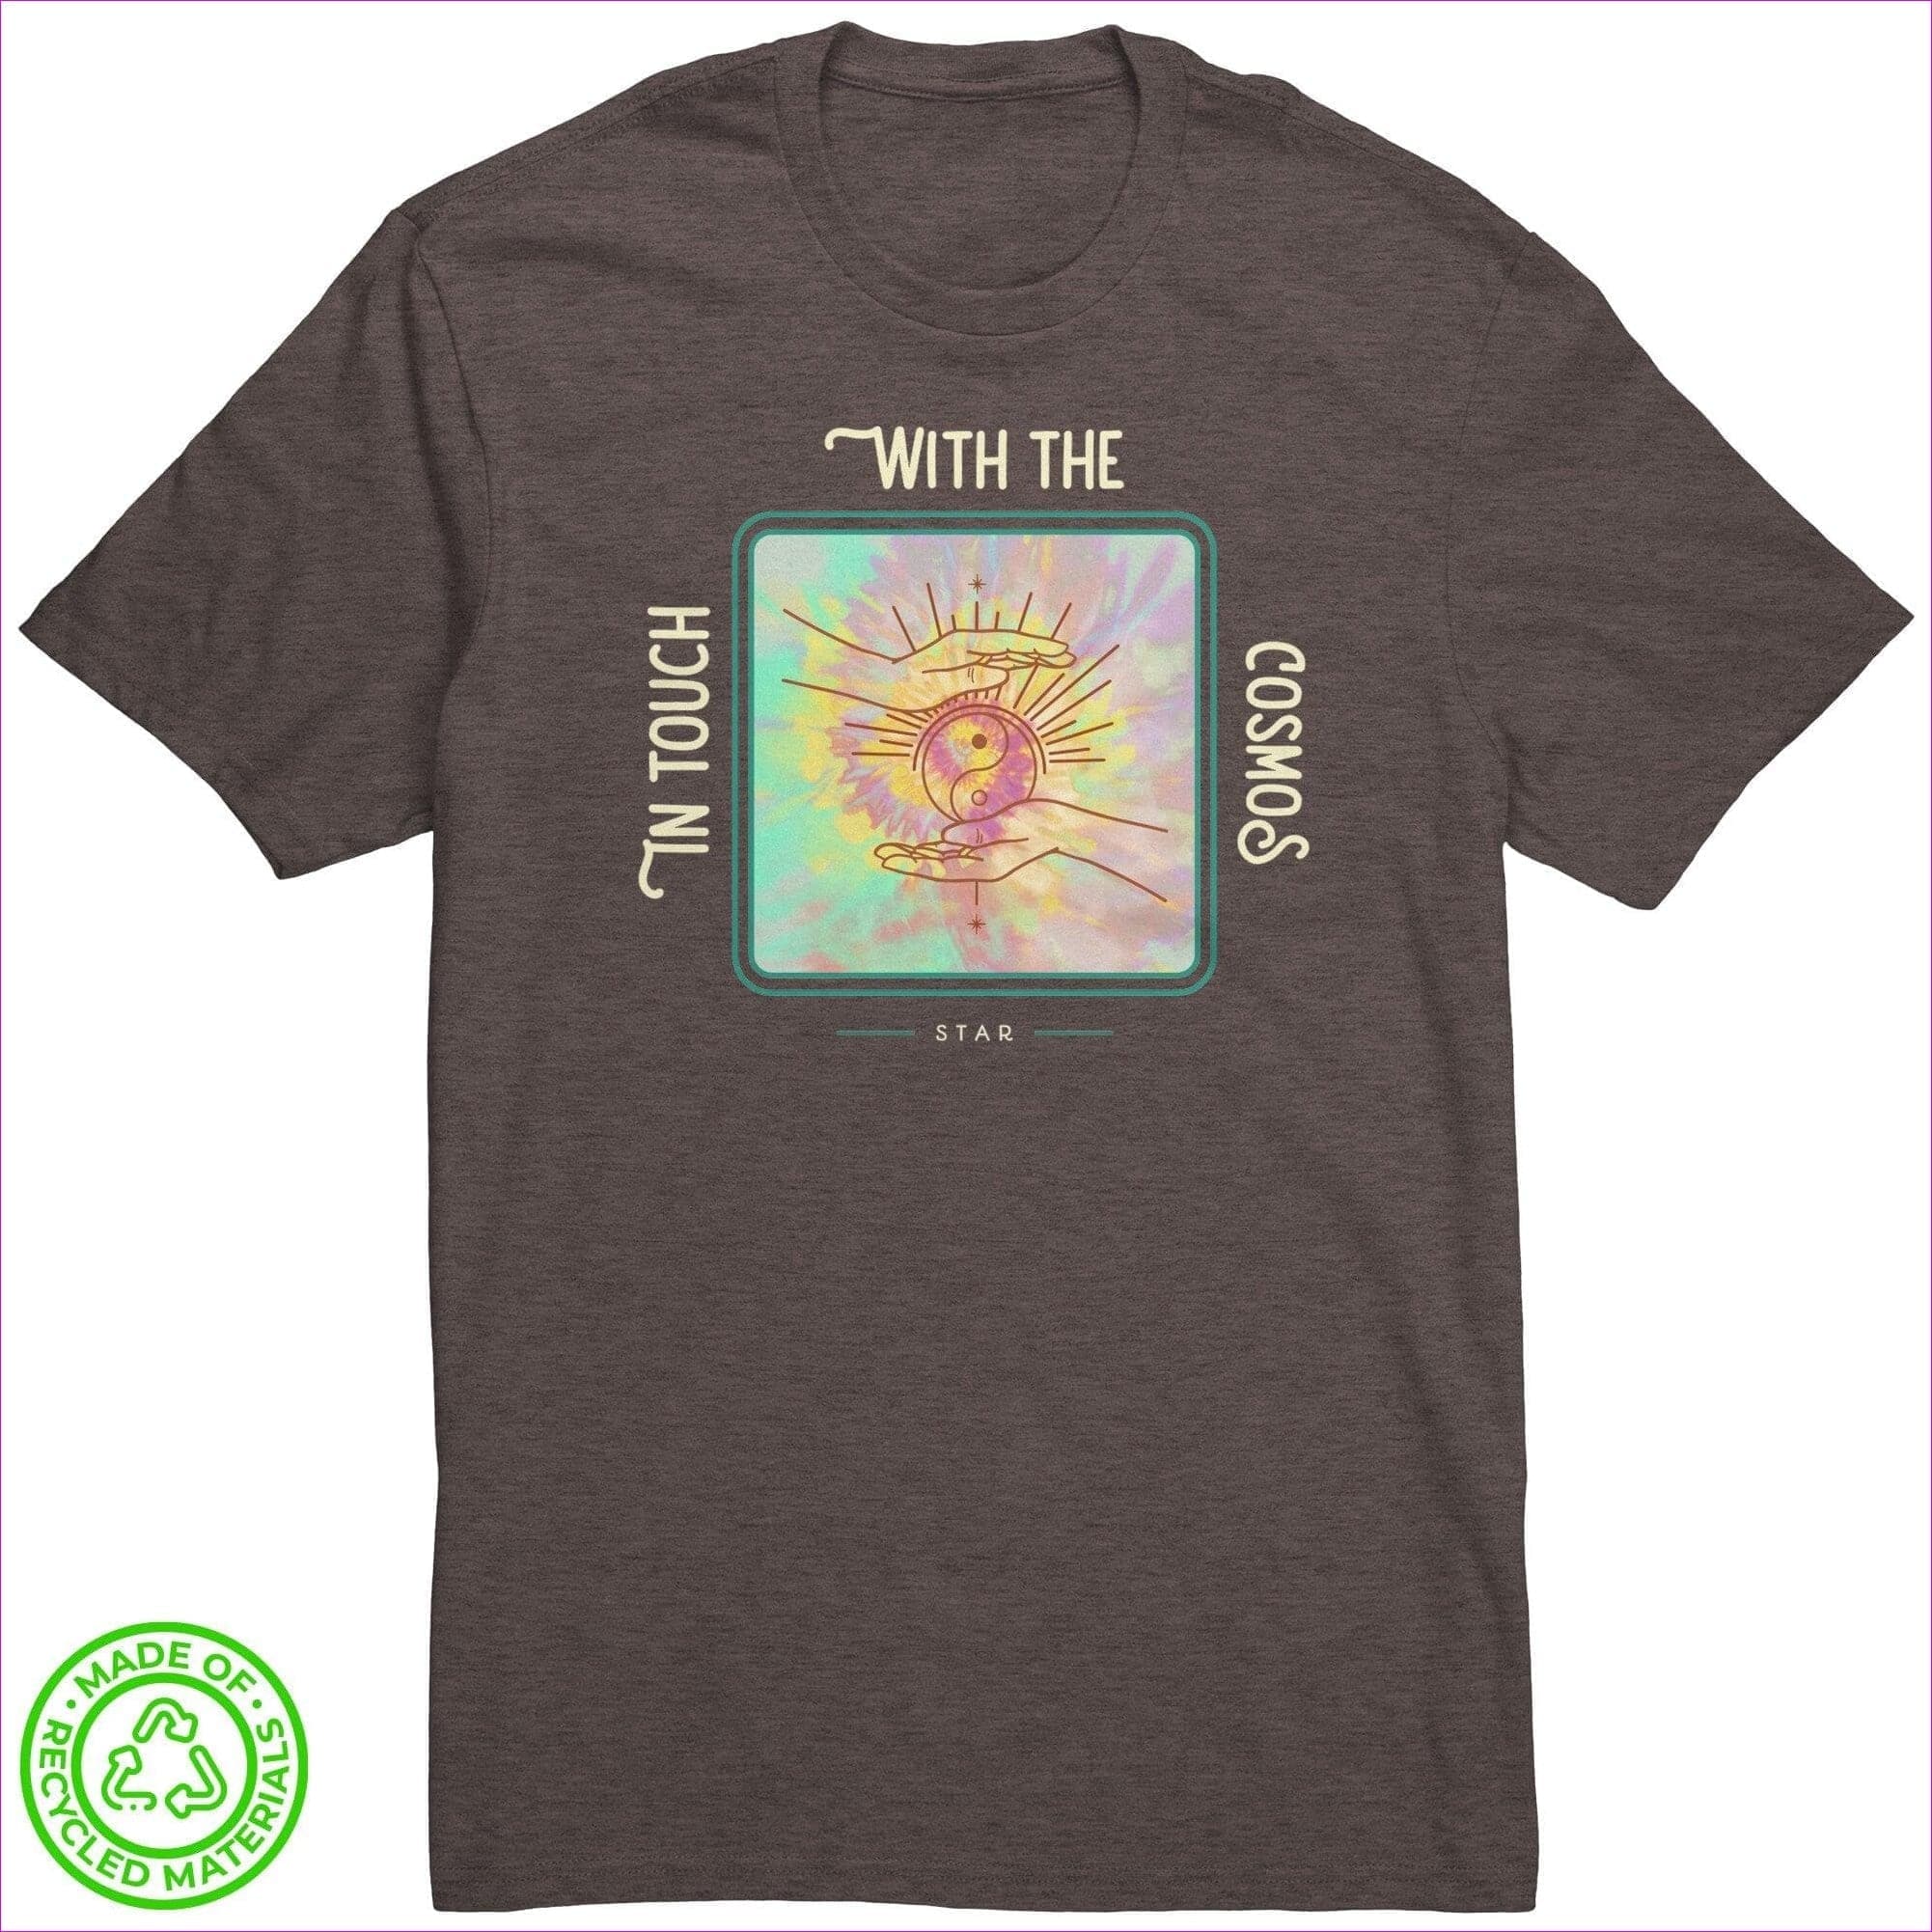 Deep Brown Heather - In Touch Recycled Fabric Unisex Tee - Unisex T-Shirt at TFC&H Co.